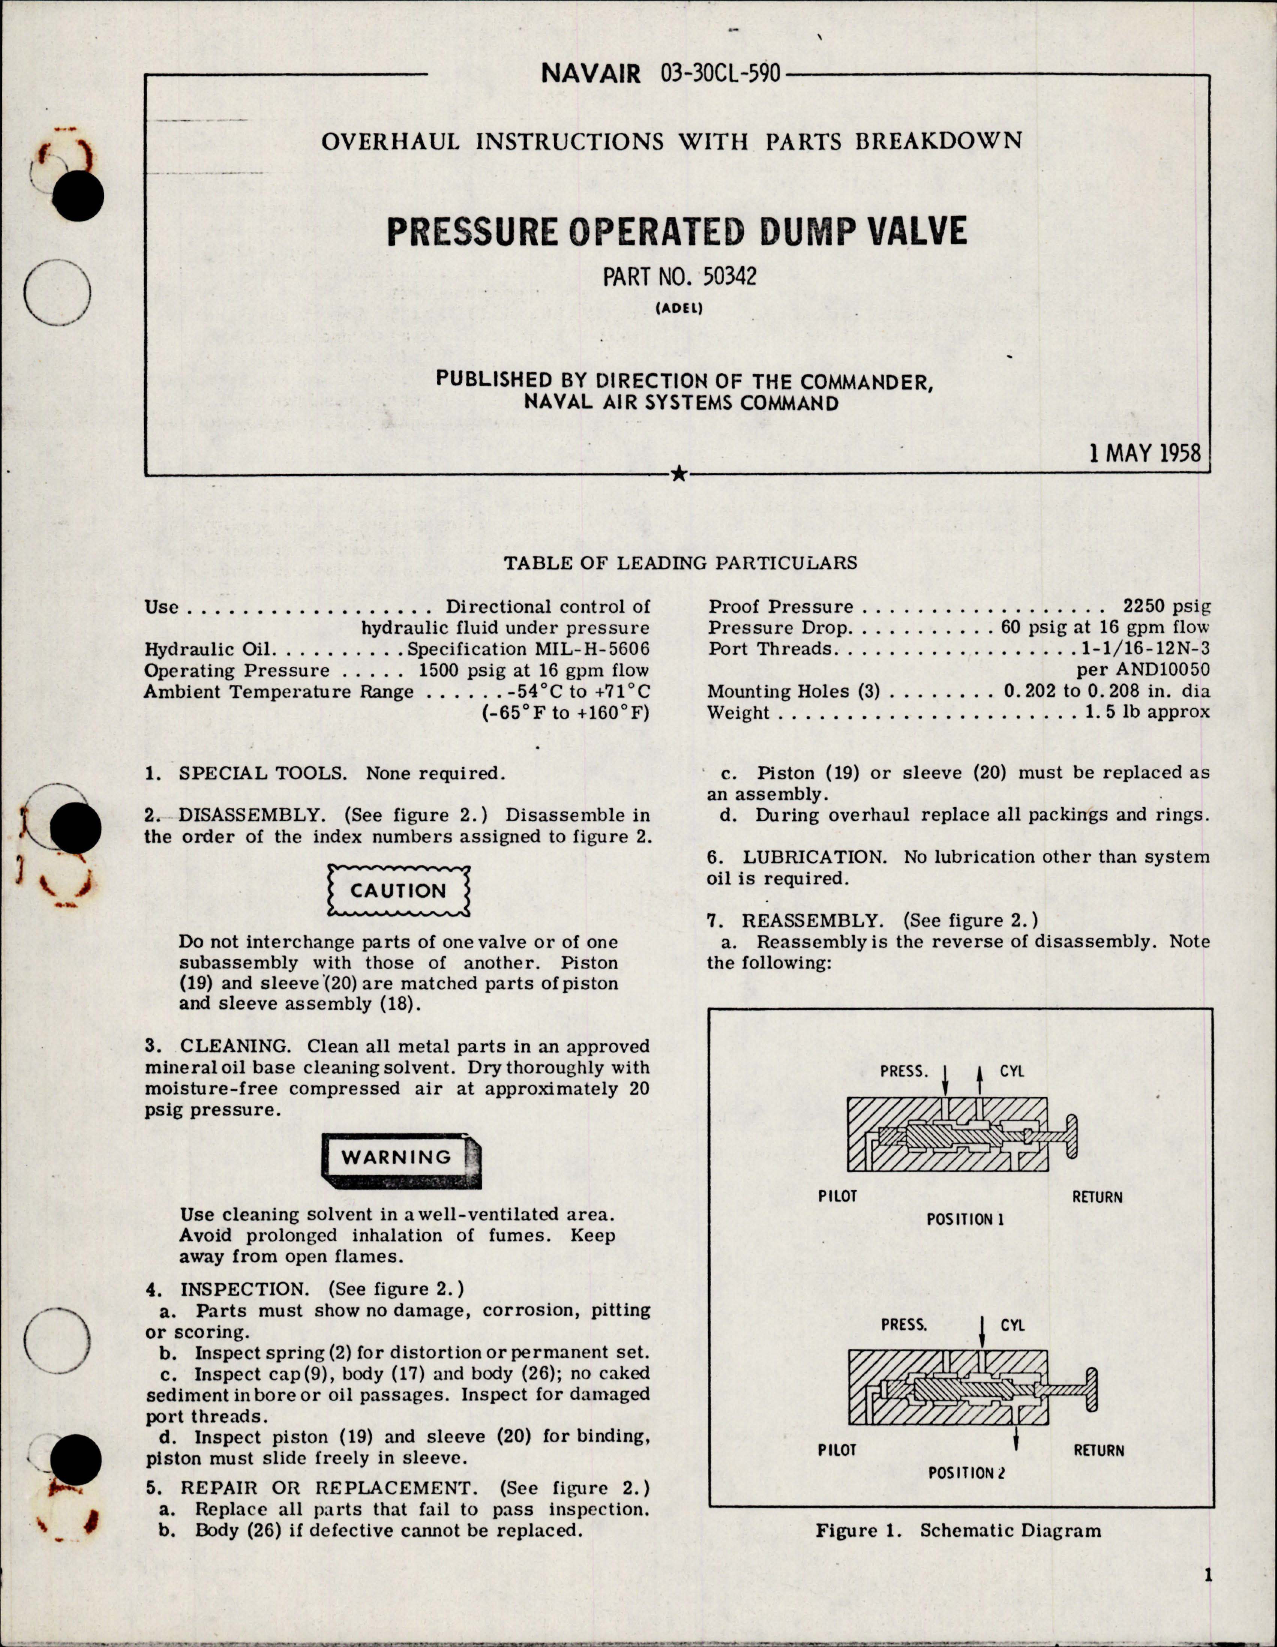 Sample page 1 from AirCorps Library document: Overhaul Instructions with Parts Breakdown for Pressure Operated Dump Valve - Part 50342